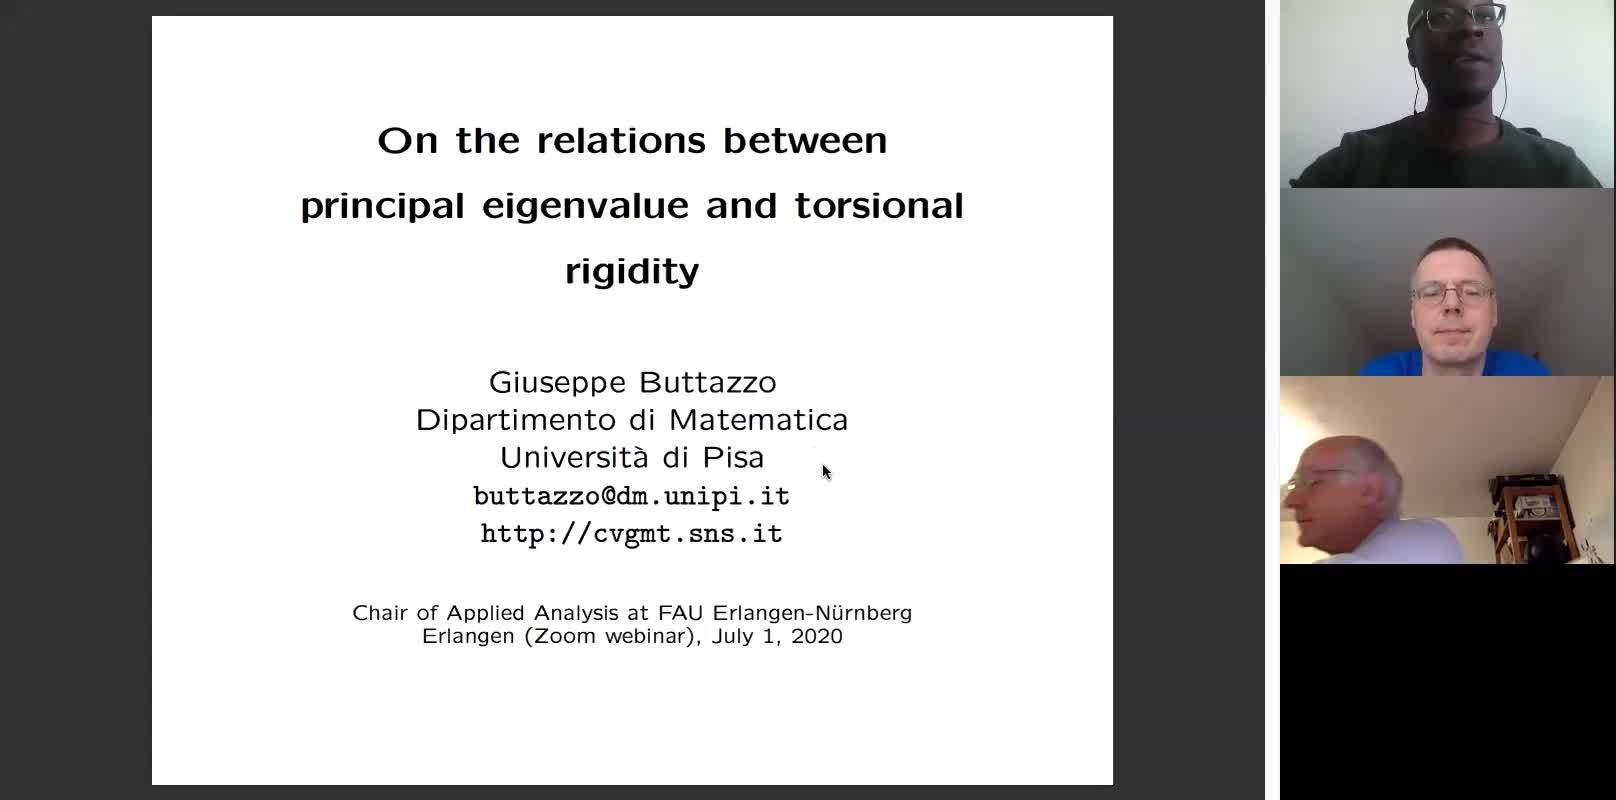 On the relations between principal eigenvalue and torsional rigidity (Giuseppe Buttazzo, University of Pisa) preview image